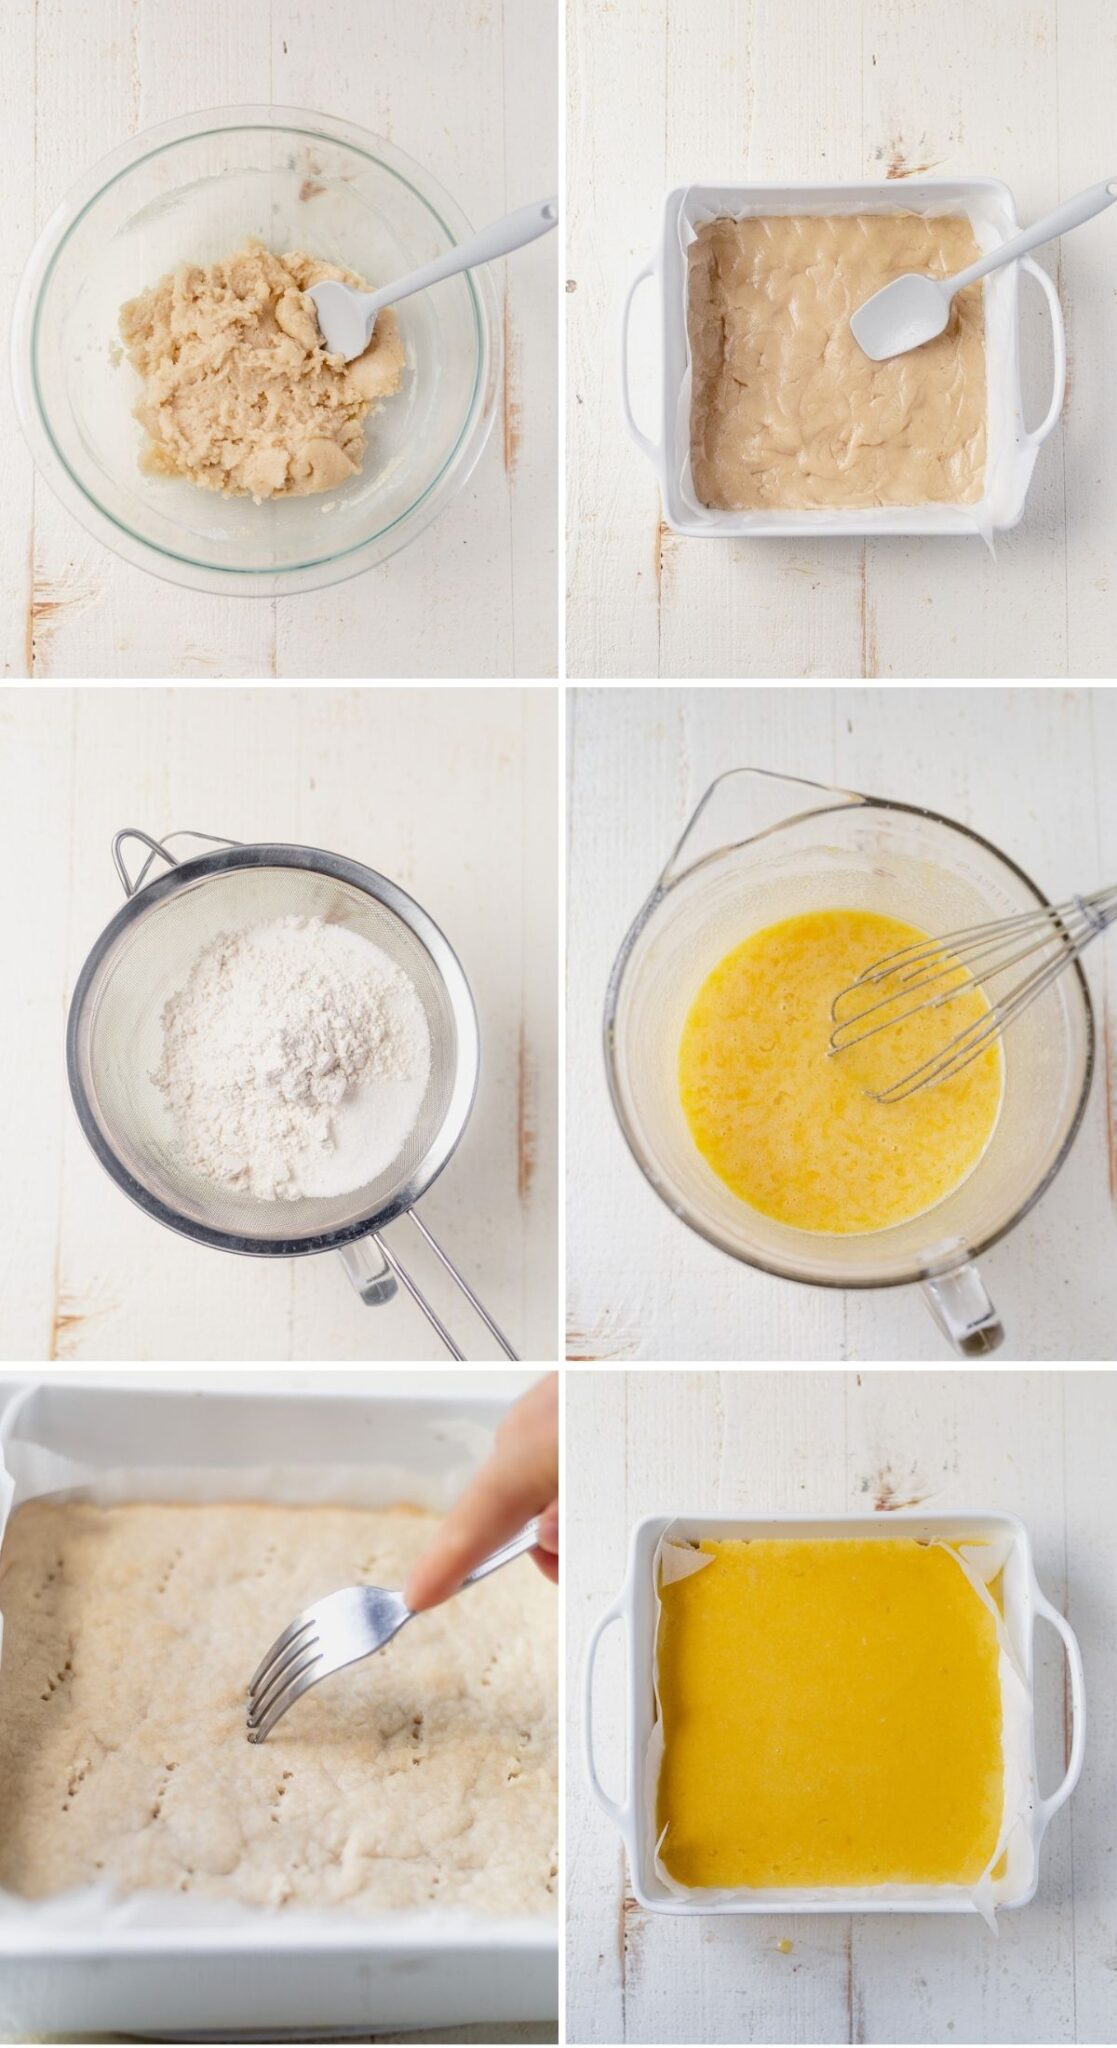 step by step images showing how to make gluten free lemon bars starting with the shortbread crust, pressing it into the pan, making the lemon curd and baking it